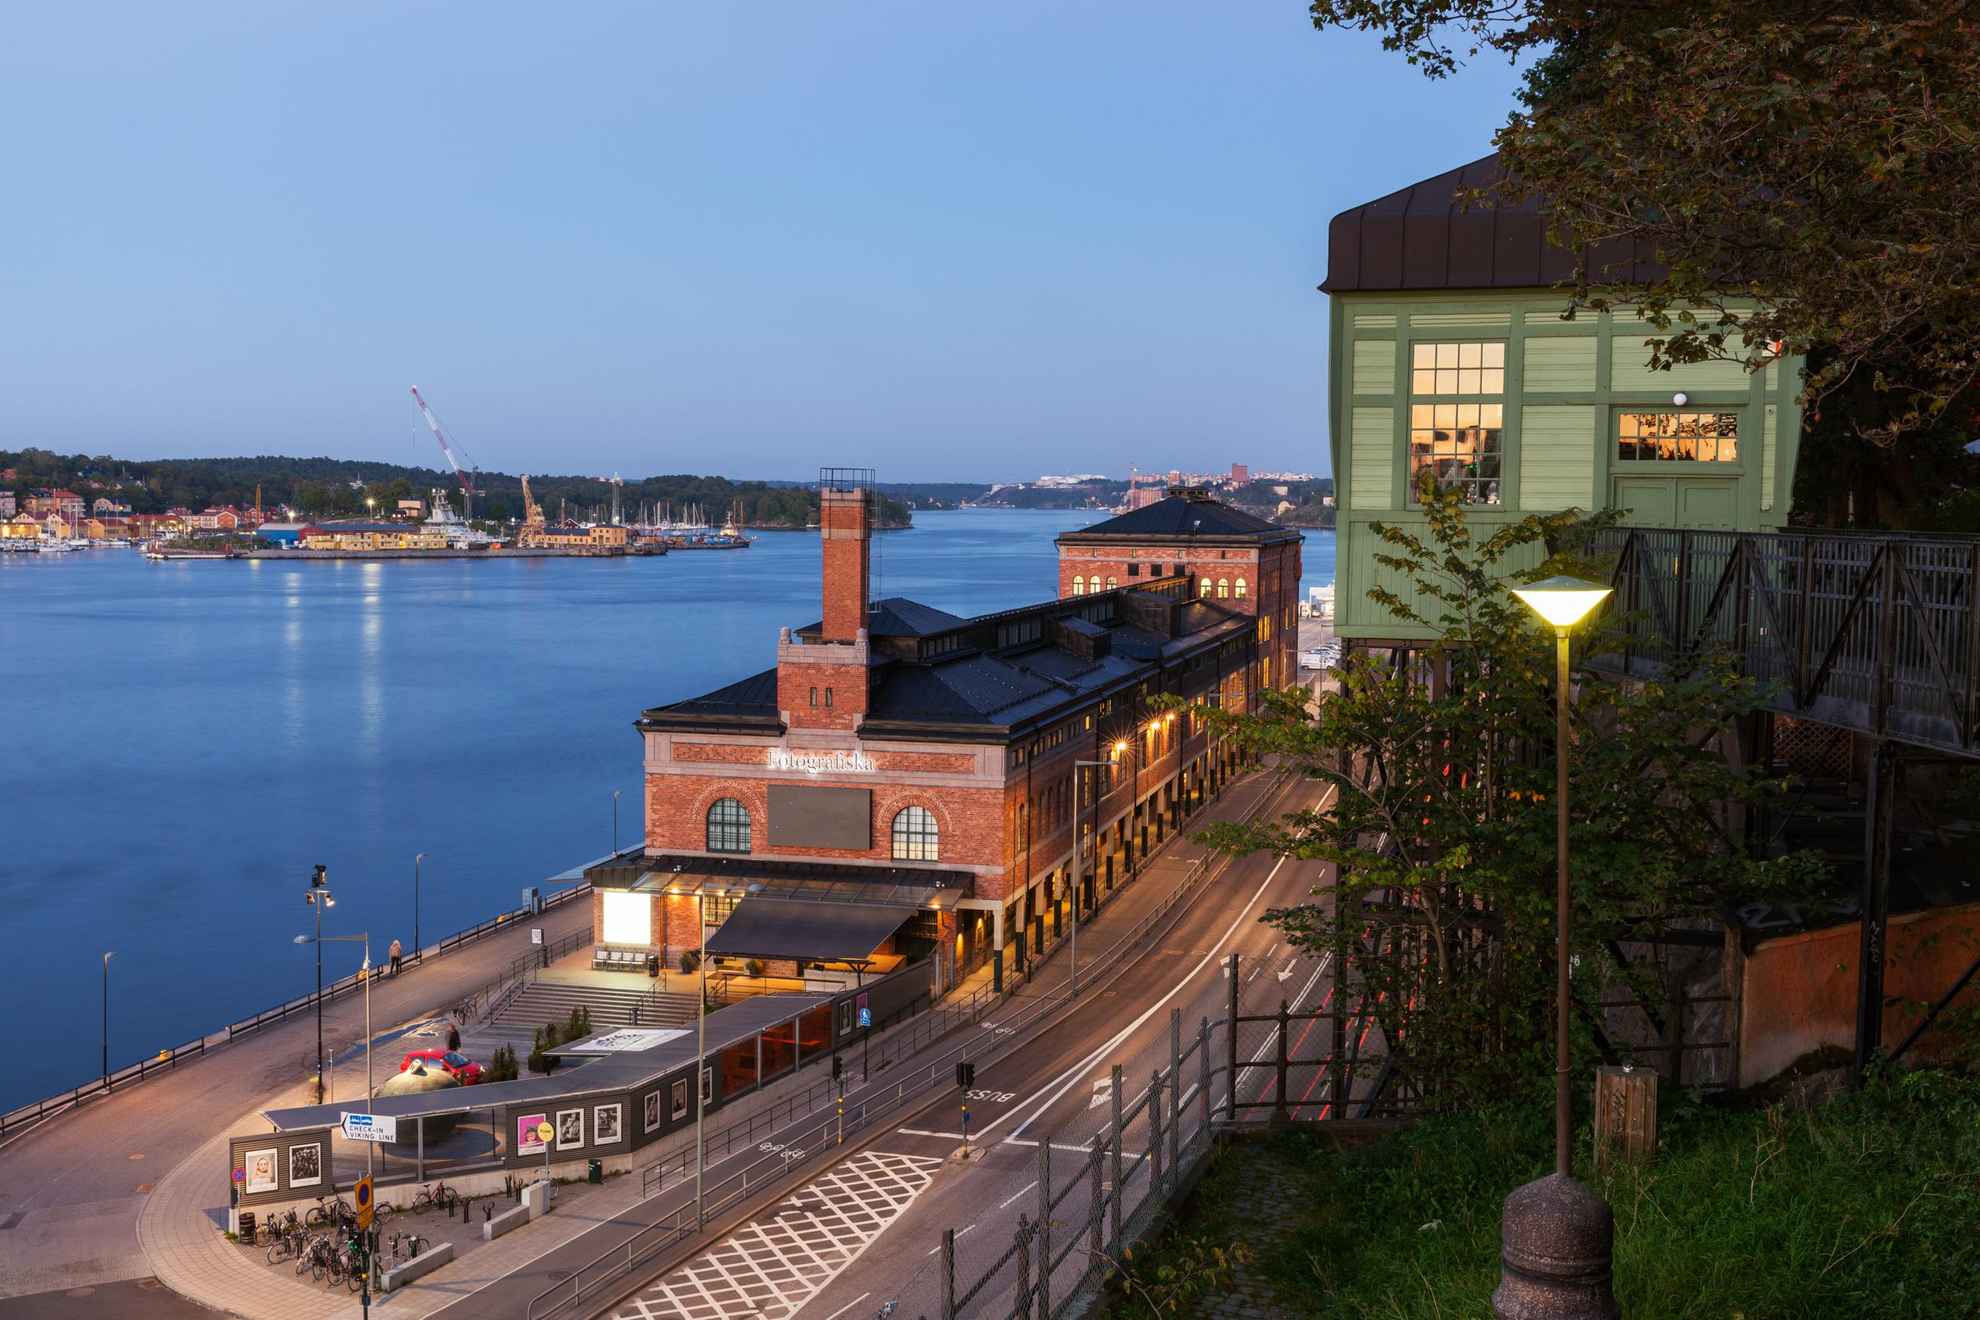 The museum Fotografiska, seen from the hill above. The sea and parts of Stockholm in the background.